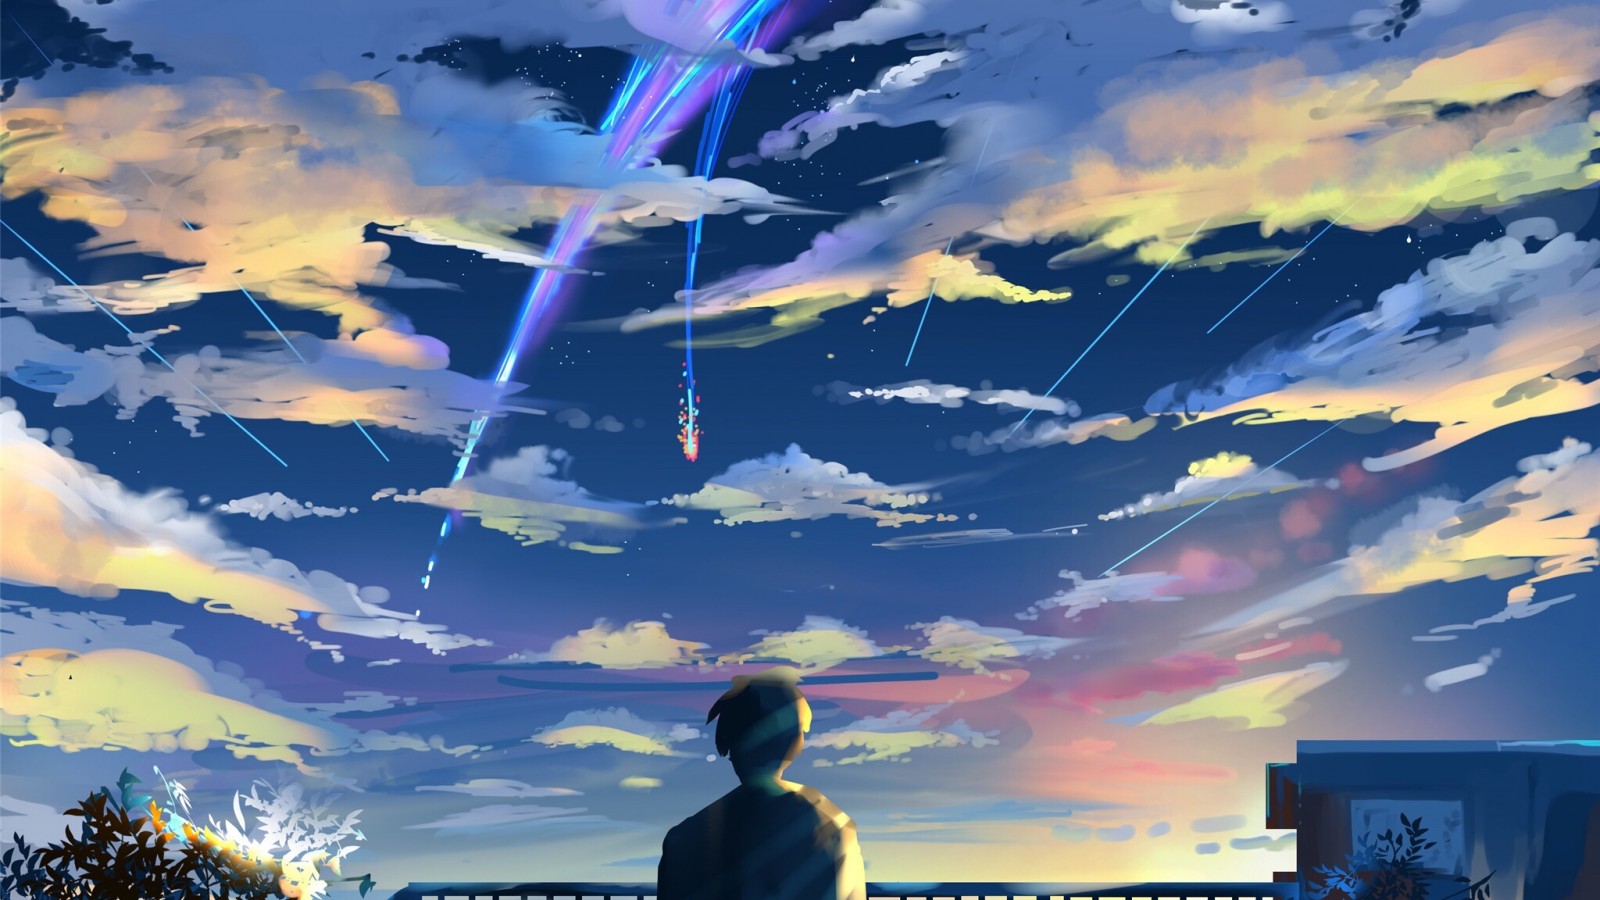 Download Backgrounds For With Your Name 249,58 Kb - Taki Kimi No Nawa - HD Wallpaper 